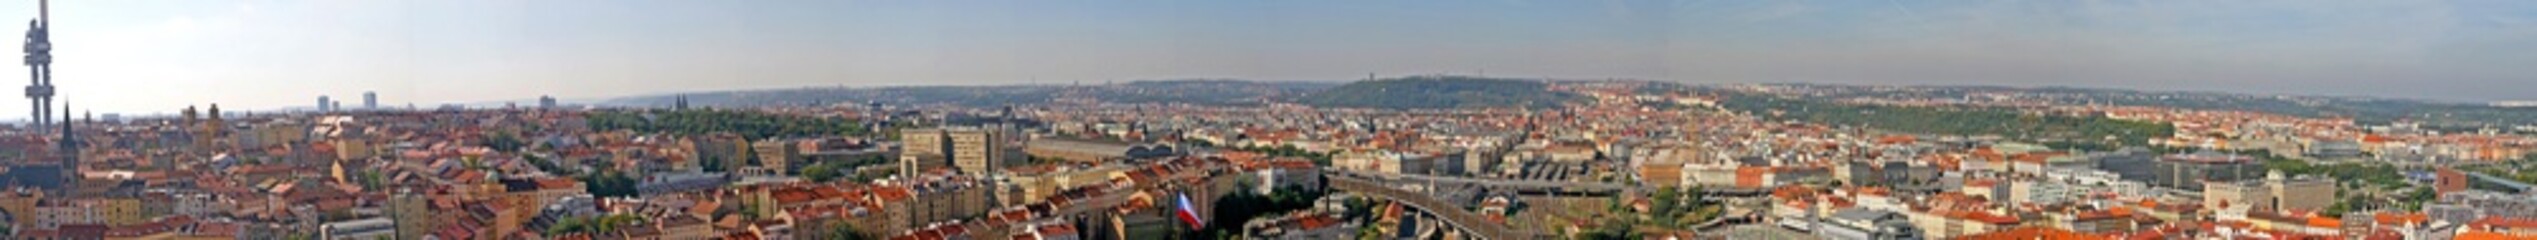 Panorama of Prague from the Zizkov district to district Holešovice. View from the observation deck National Monument at Vítkov